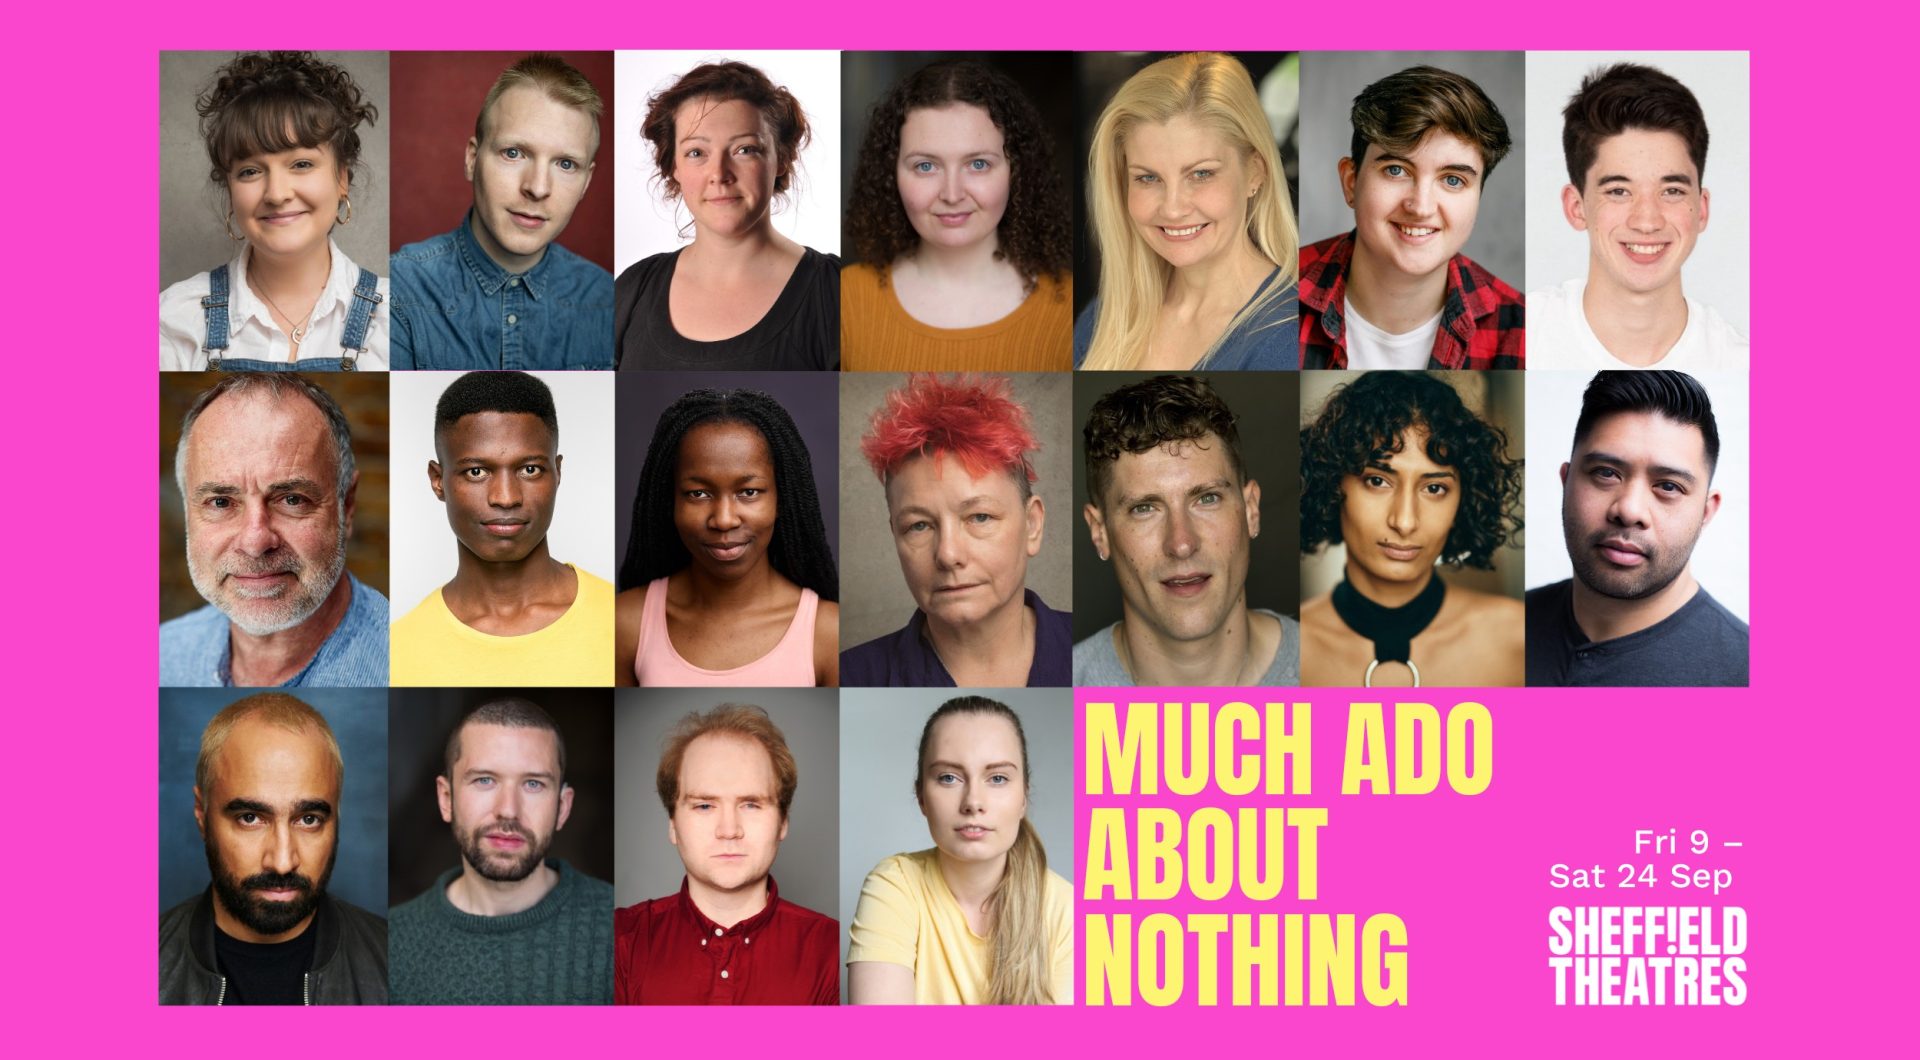 A composite arrangement of 20 headshots of actors of varying age, race, gender set against a vibrant pink background. Yellow text reads: 'Much Ado About Nothing.' Smaller white text reads: 'Fri 9 – Sat 24 Sep 2022, Sheffield Theatres.'